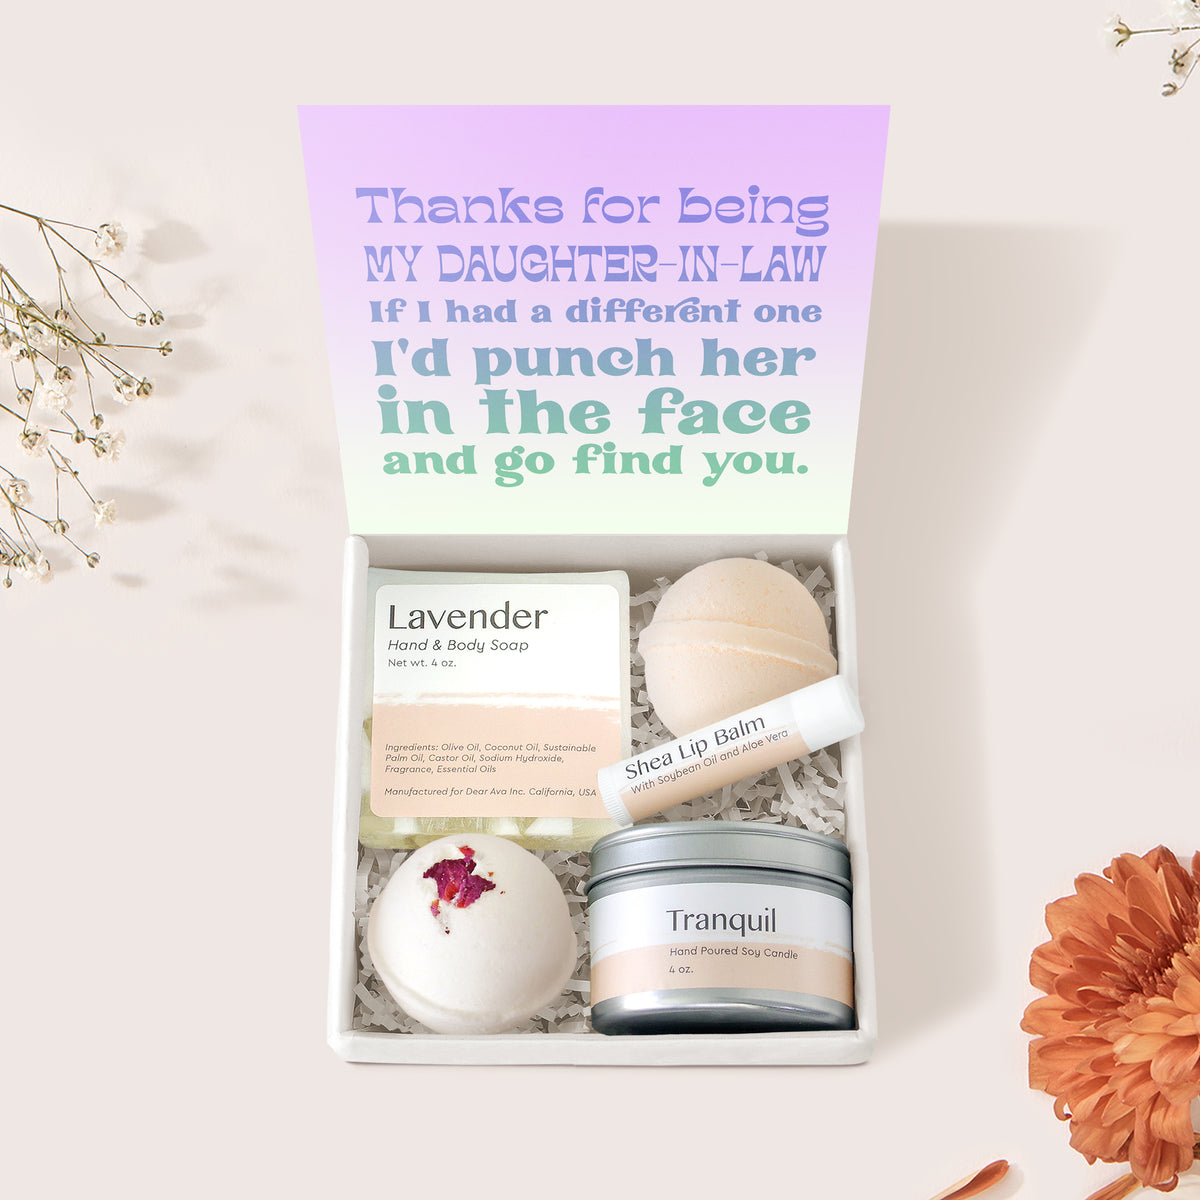 Daughter-In-Law Spa Gift Box